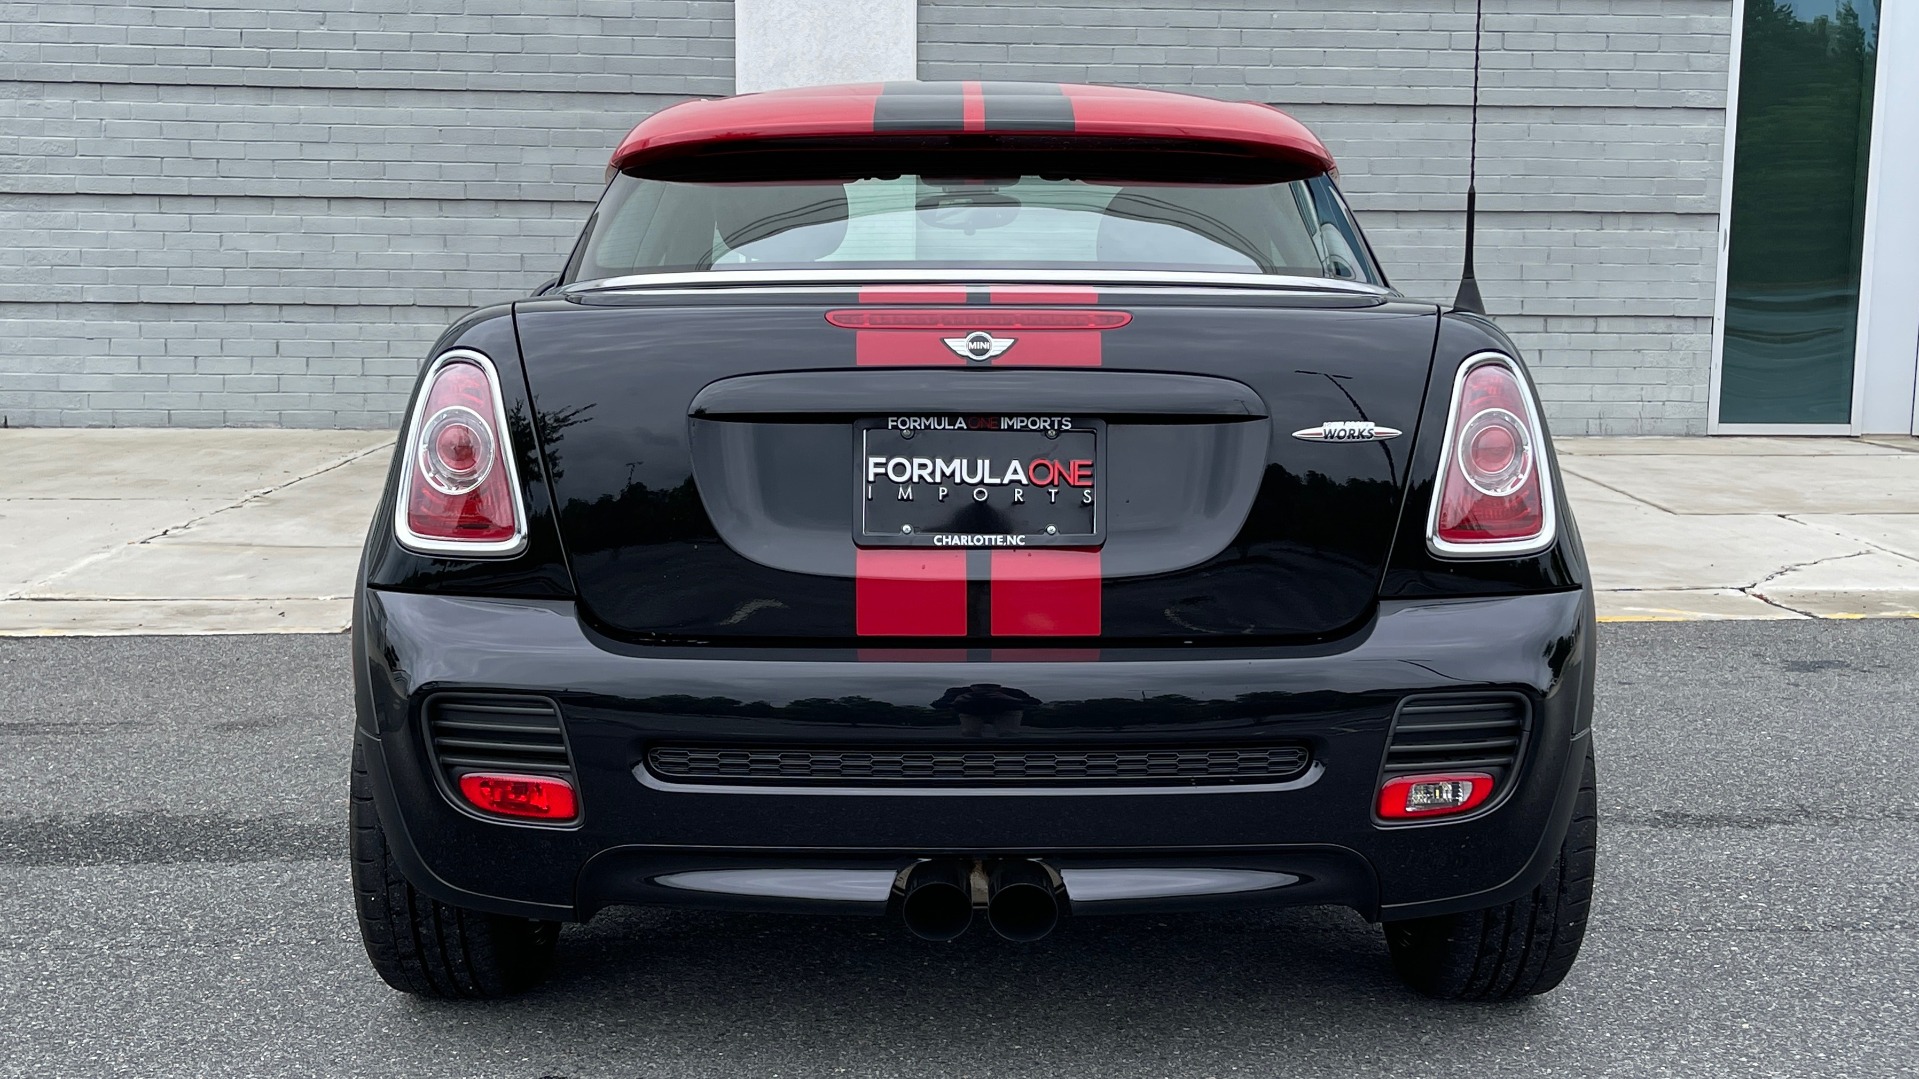 Used 2013 MINI COOPER COUPE JOHN COOPER WORKS / 1.6L TURBO / AUTO / H/K SOUND for sale Sold at Formula Imports in Charlotte NC 28227 16